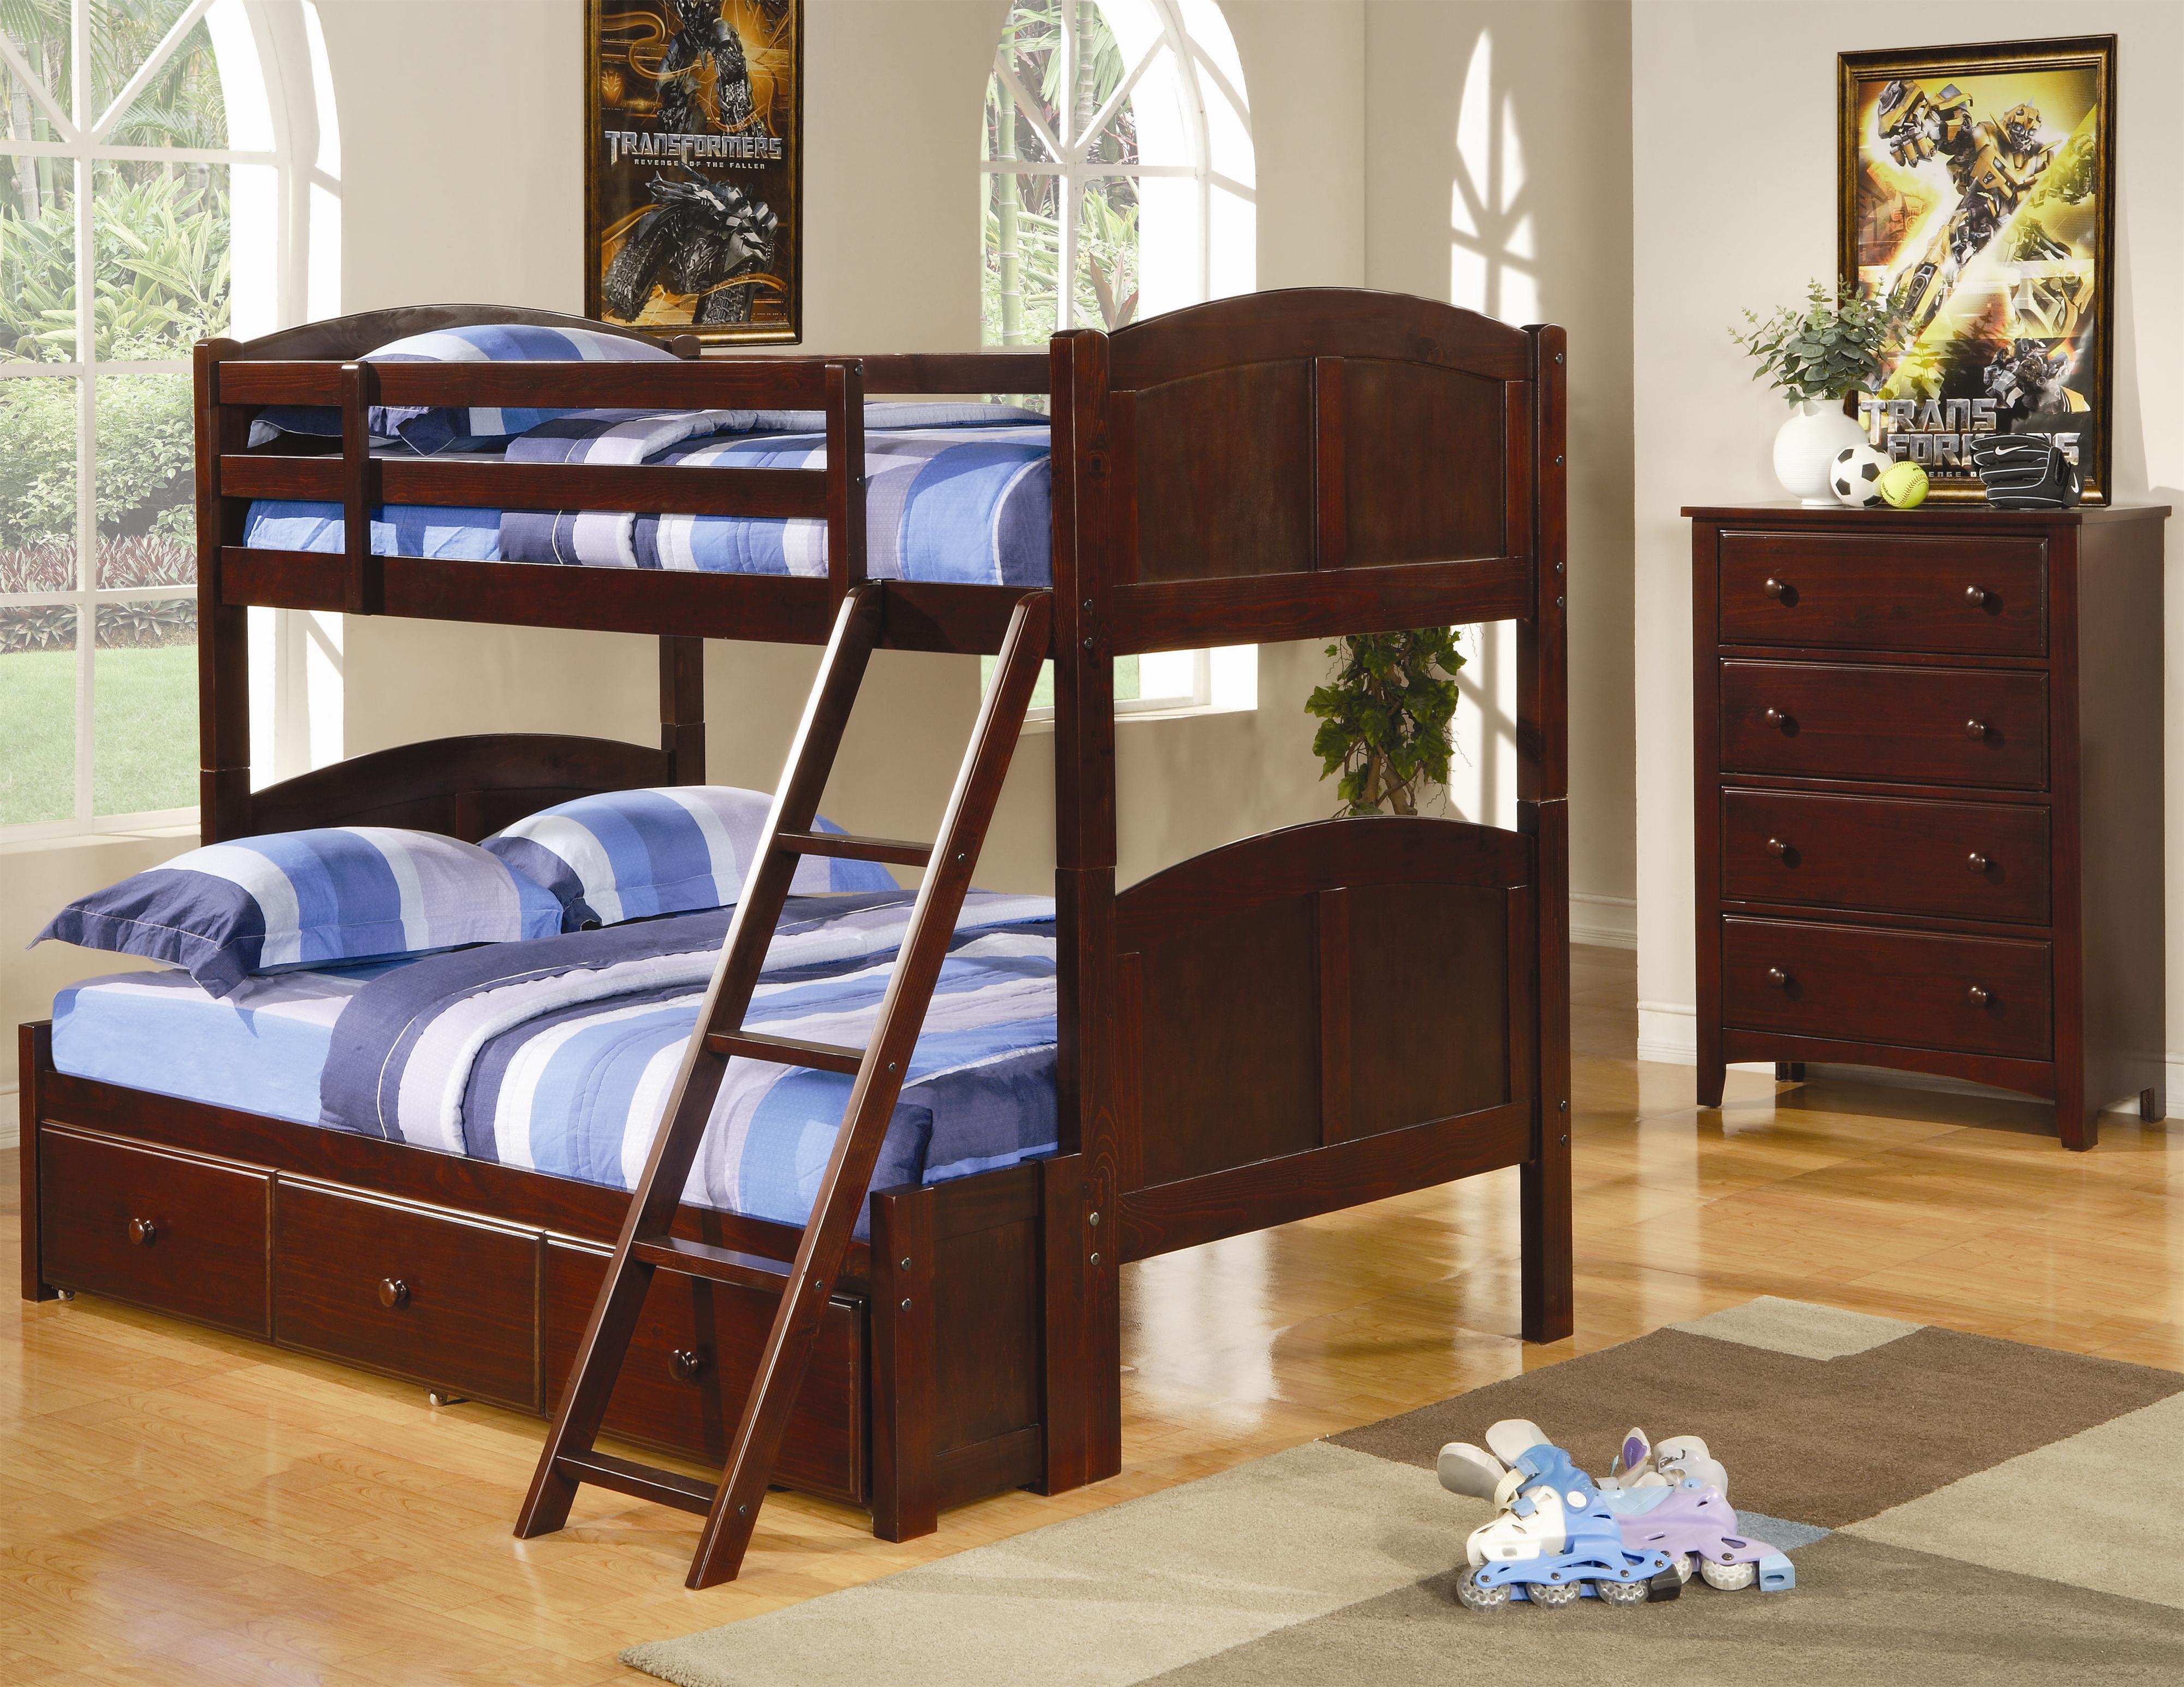 bunk beds with storage and mattresses